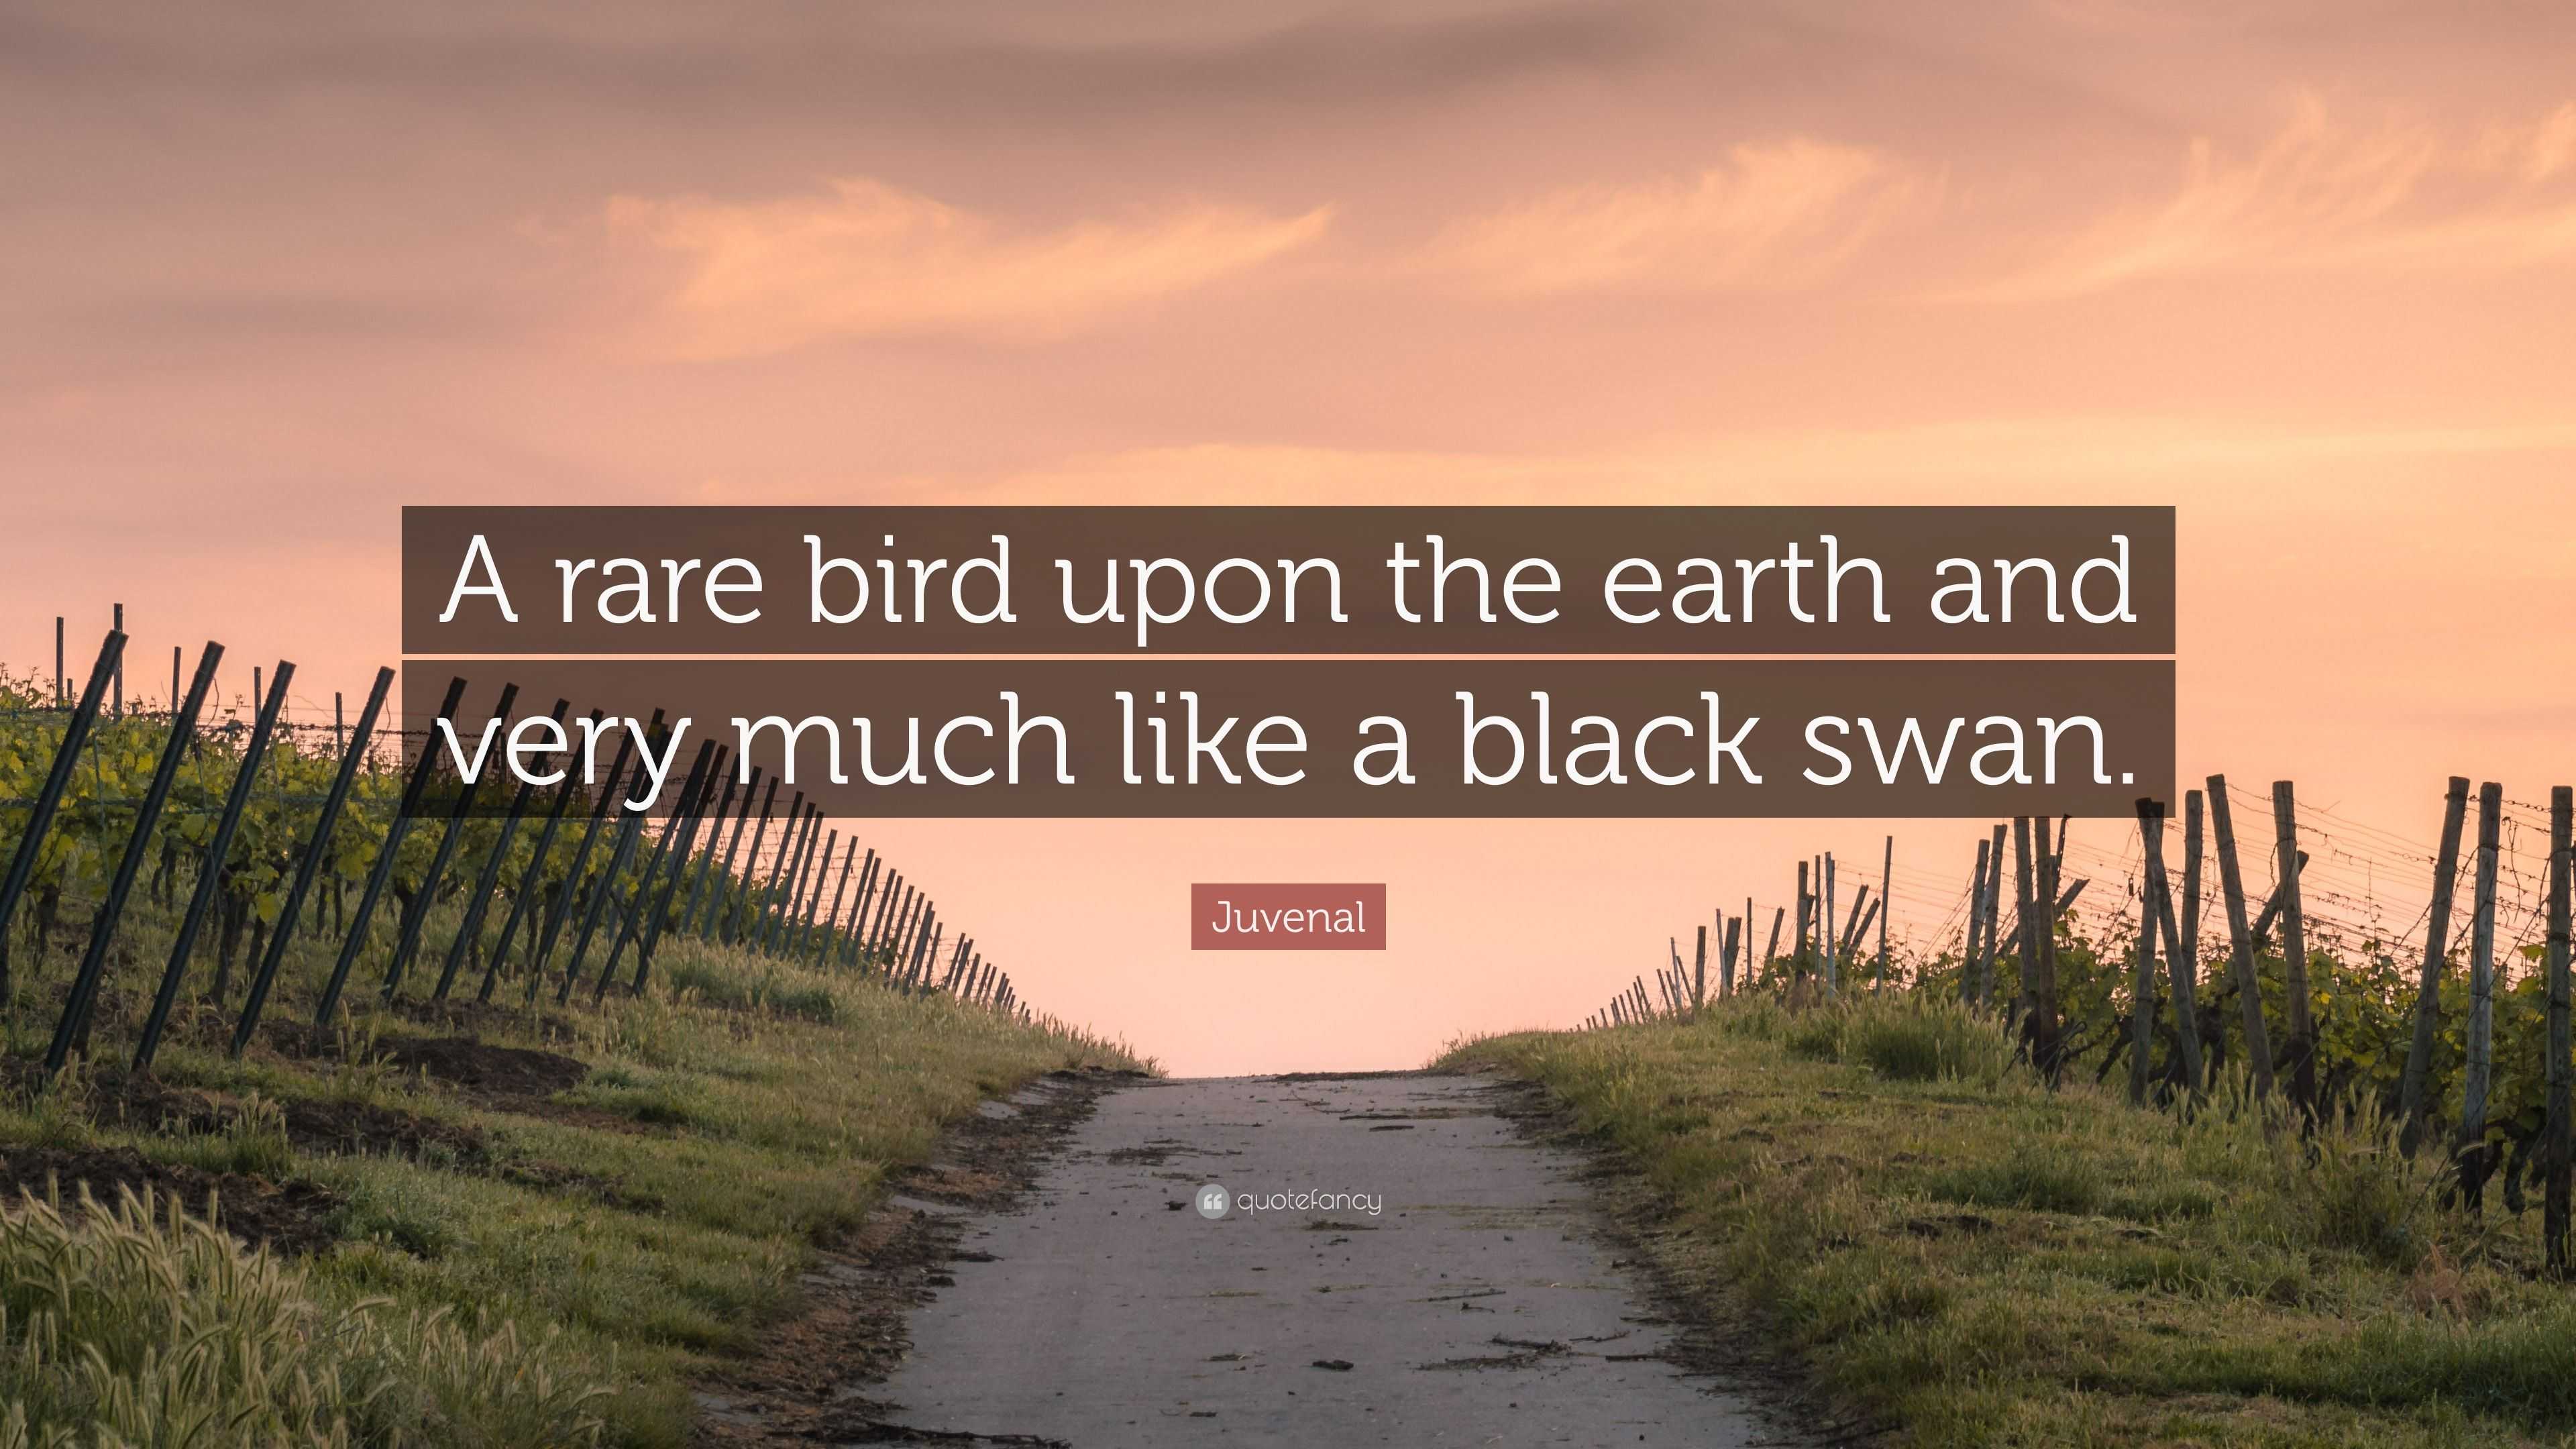 Juvenal Quote: “A rare earth and very much like a black swan.”